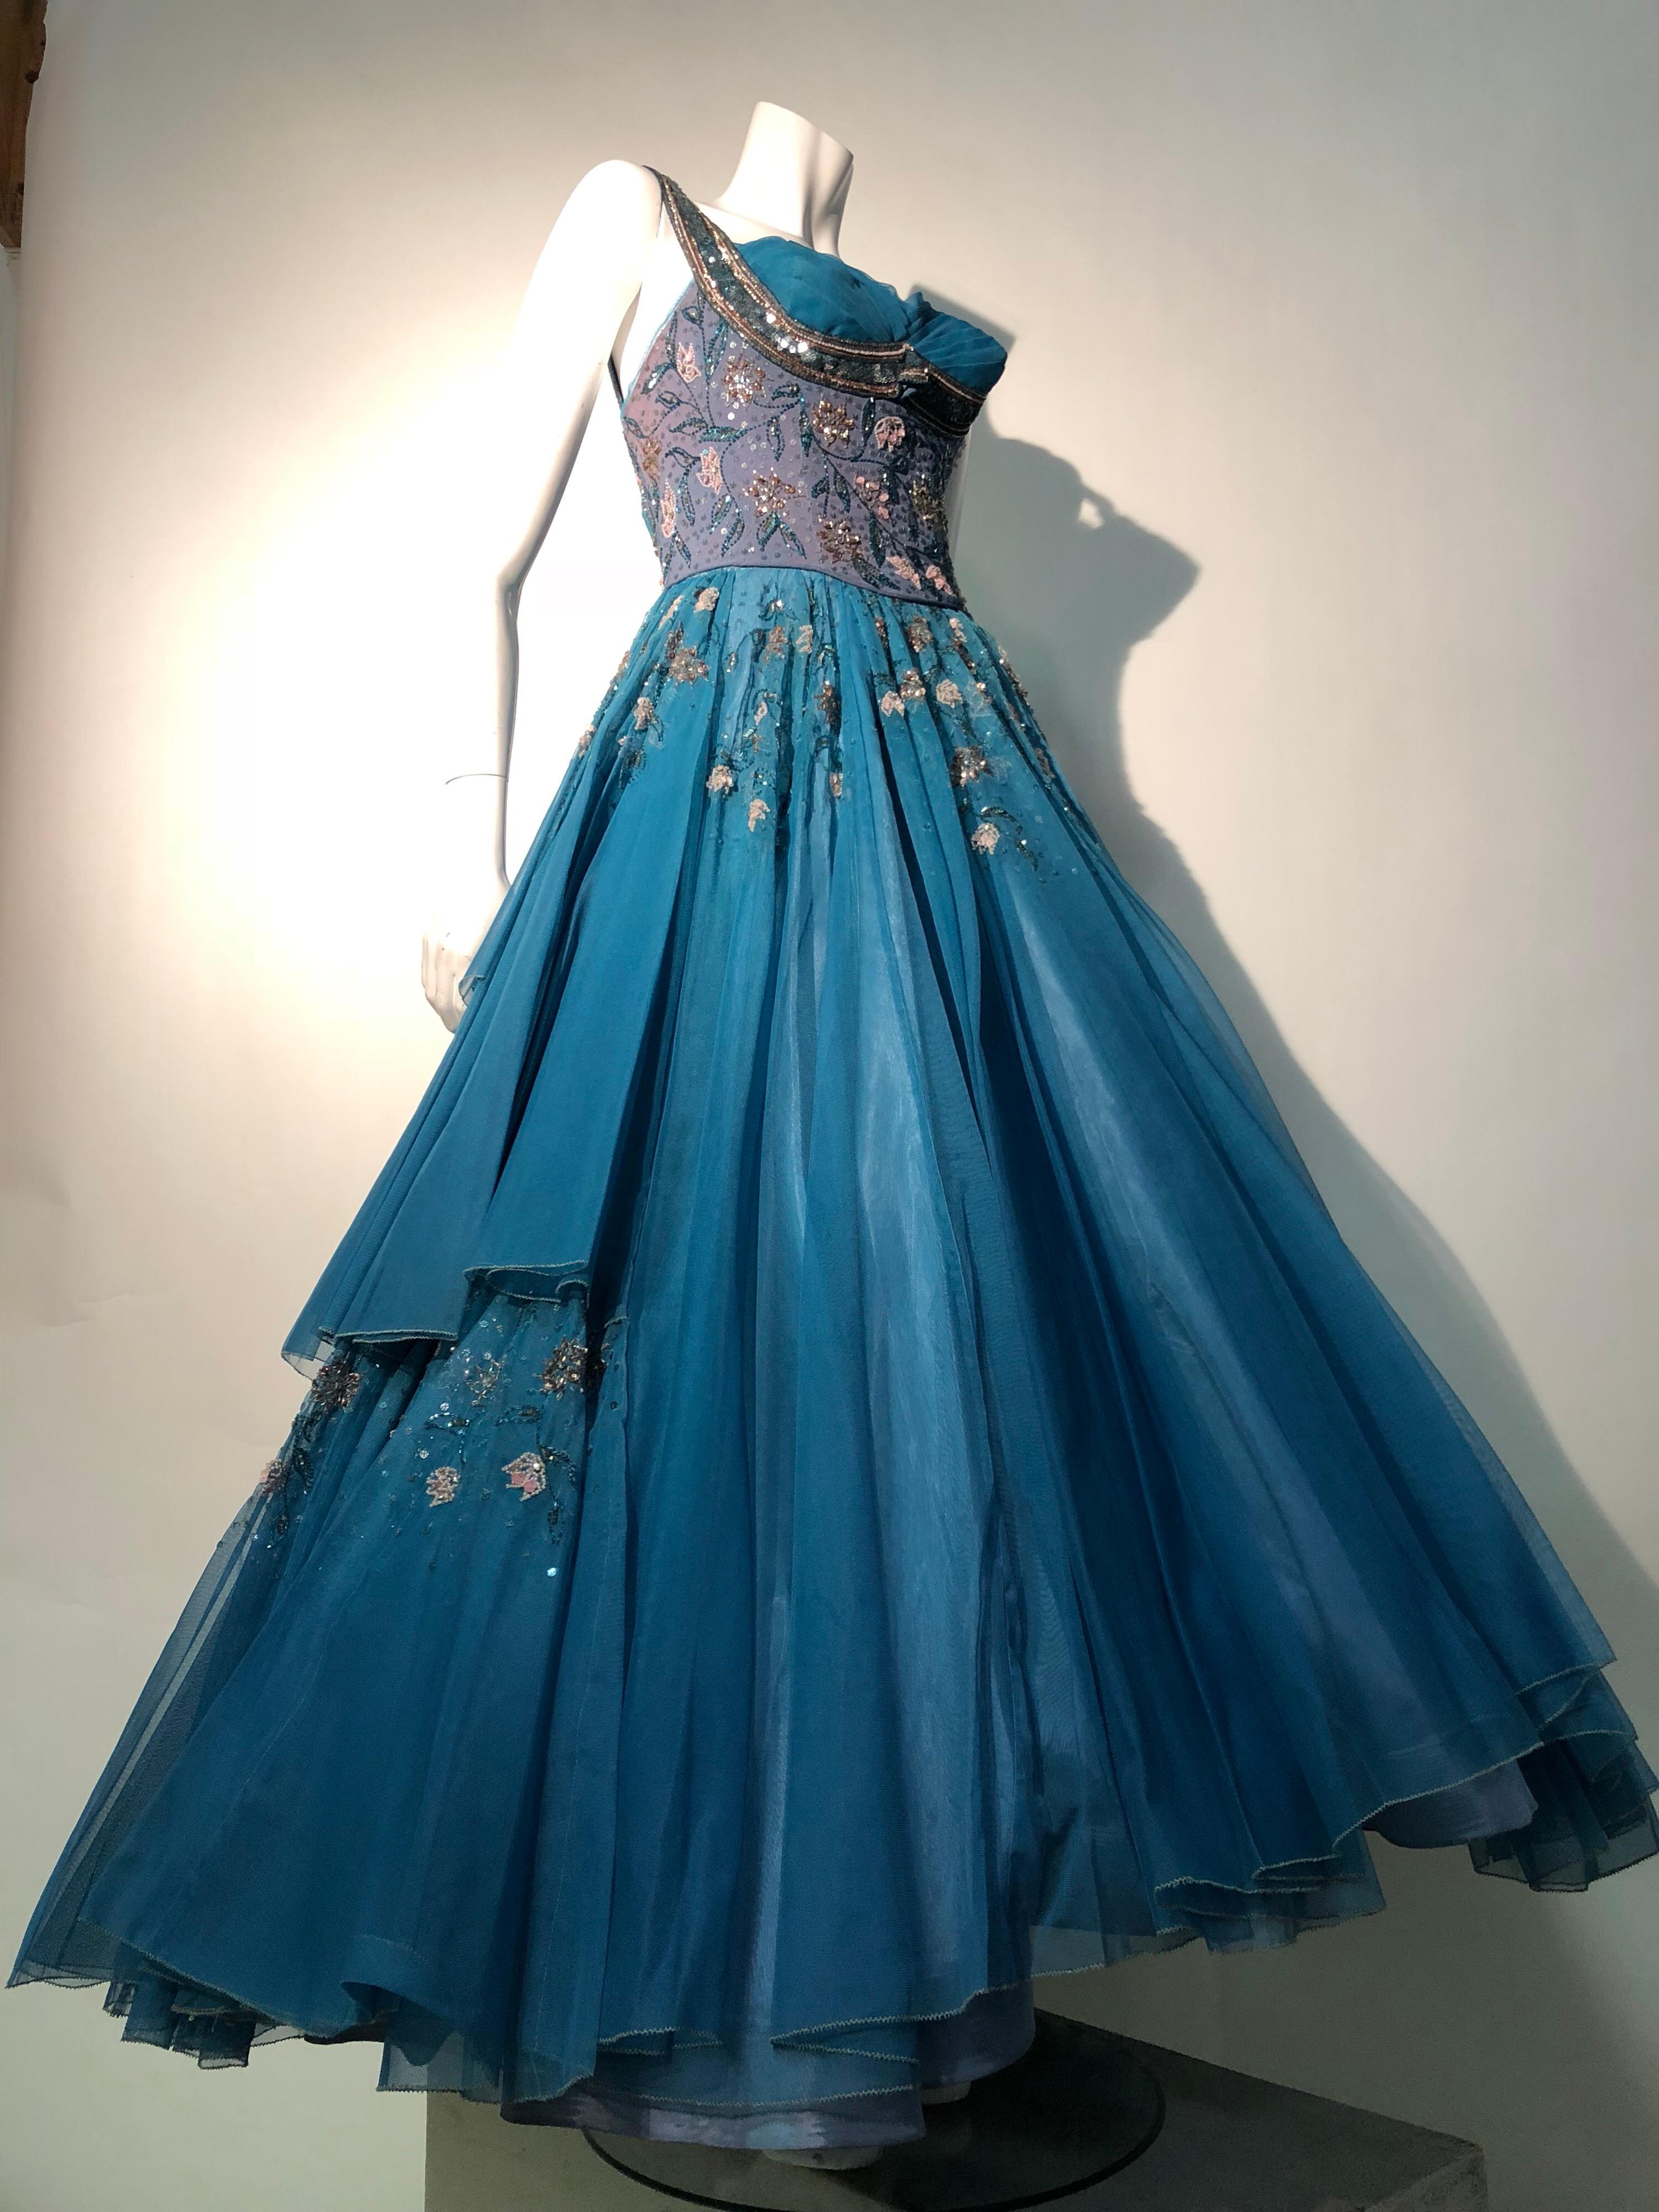 1950s MGM Mme. Etoile by Irene Sharaff couture ball gown in deep mauve and teal silk tulle and horsehair : Irene Sharaff, 5-time Academy Award Winner for costume design, made this gown for an anonymous MGM star client. This rare and pristine ball